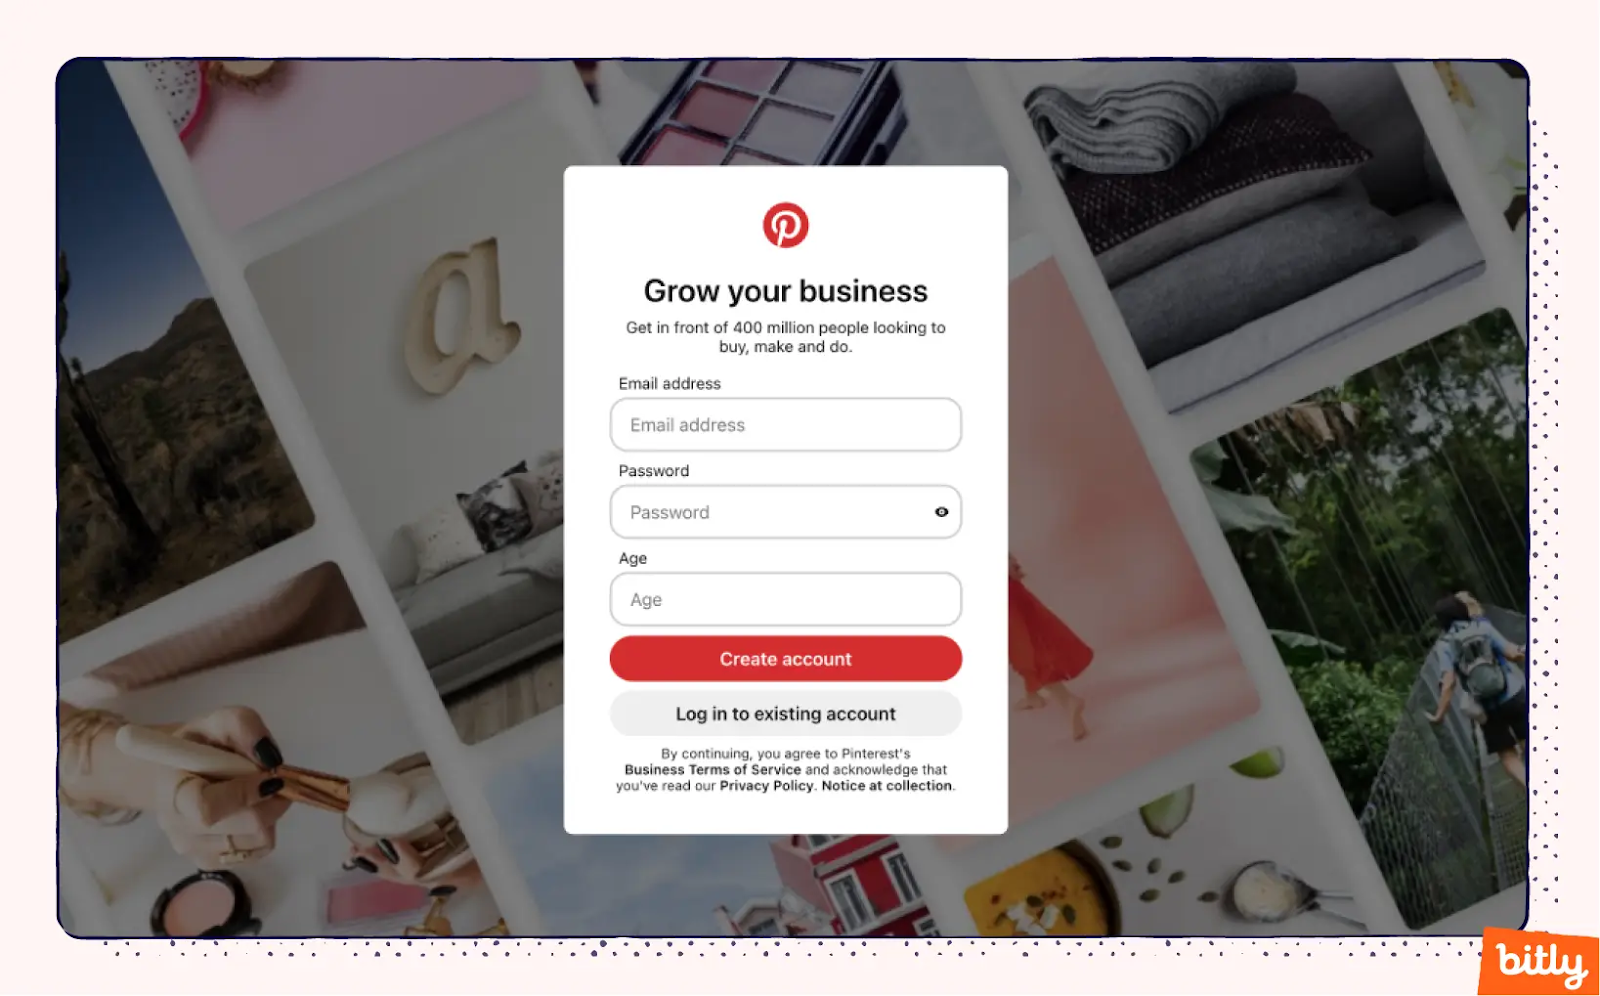 A screenshot of the Pinterest business acconut sign up page